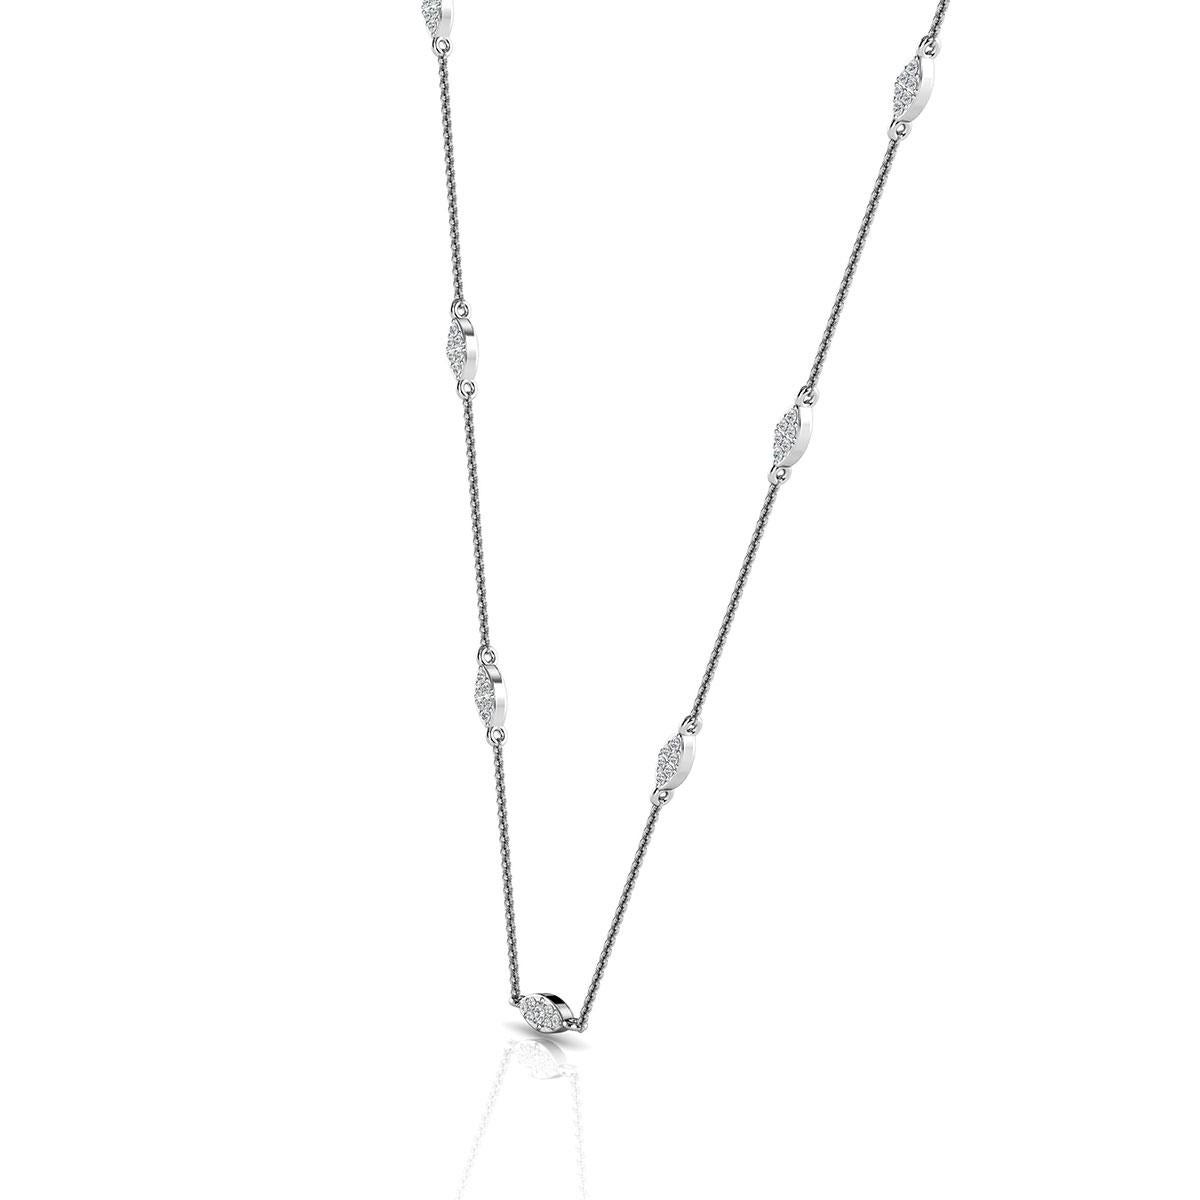 This delicate and elegant necklace features round brilliant diamonds micro-prong set in seven (7) Marquise shape bars. Experience the difference!

Product details: 

Center Gemstone Type: NATURAL DIAMOND
Center Gemstone Color: WHITE
Center Gemstone